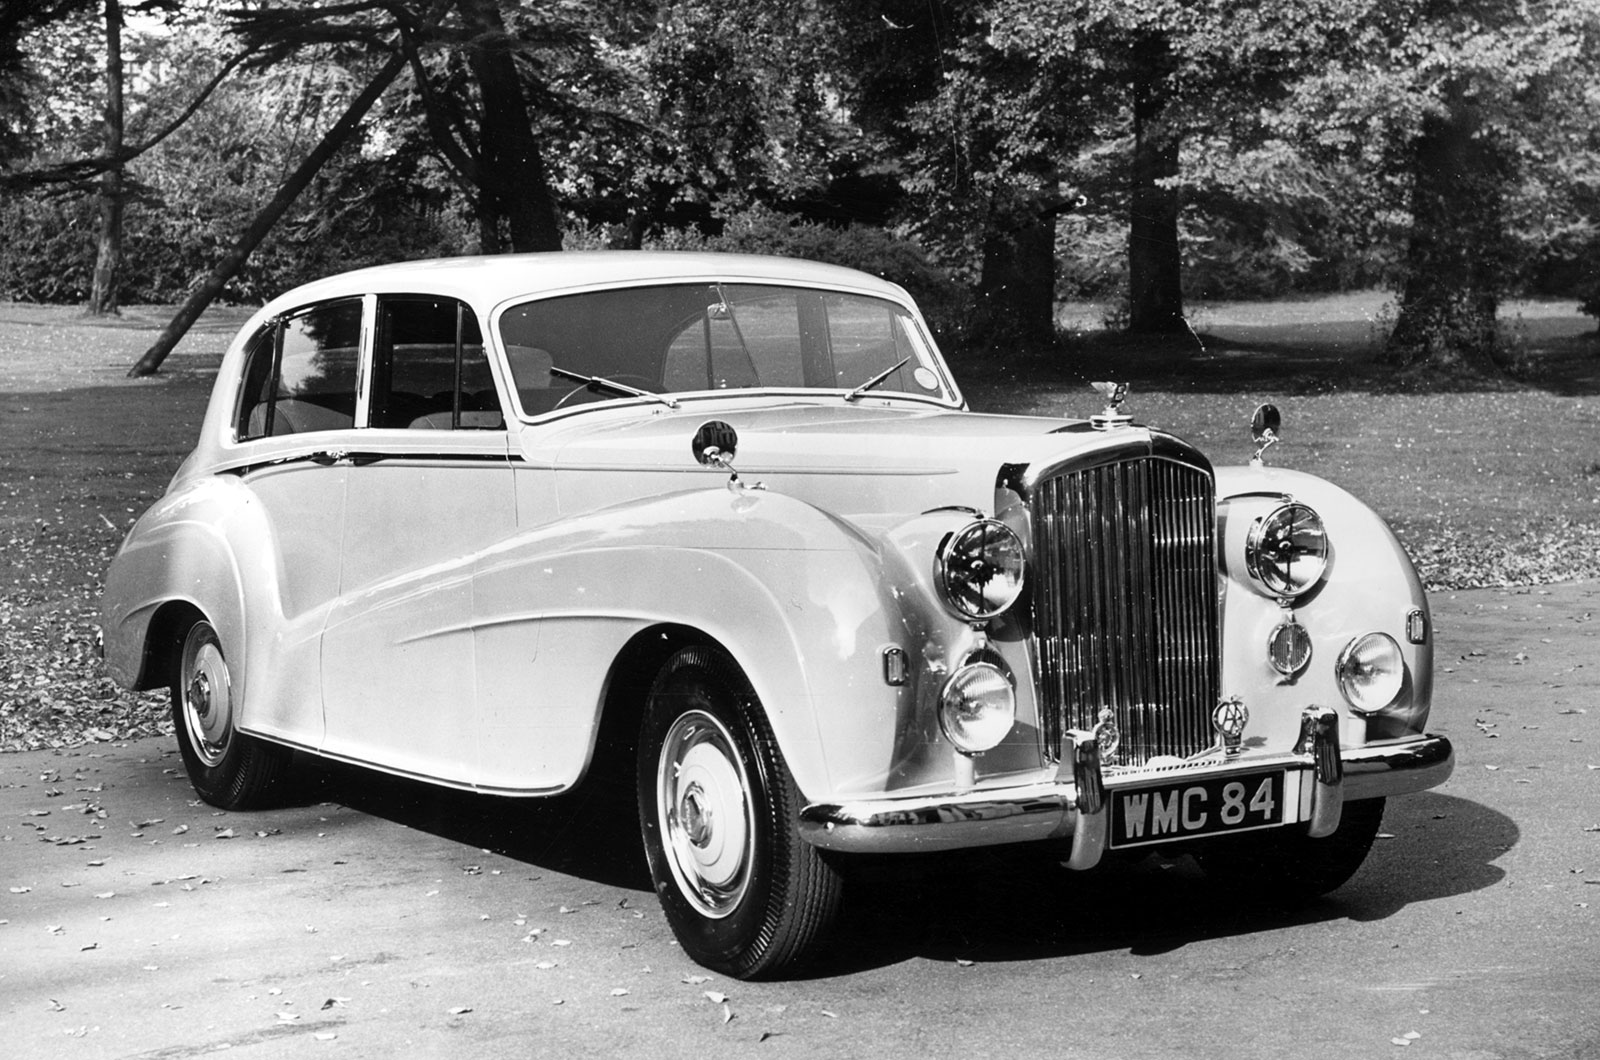 <p><span>The Bentley MkVI was updated in 1952 and was intended to be named the MkVII, but instead was launched as the <strong>R-Type</strong>; as with its predecessor, it could be ordered in Rolls-Royce form, as the <strong>Silver Dawn</strong>. With a stretched chassis the lines were more sporting and streamlined – just as a Bentley should be.</span></p><p><span>Power came from a 4566cc straight-six which offered excellent performance and refinement, while usability was improved with the fitment of a bigger trunk.</span></p>